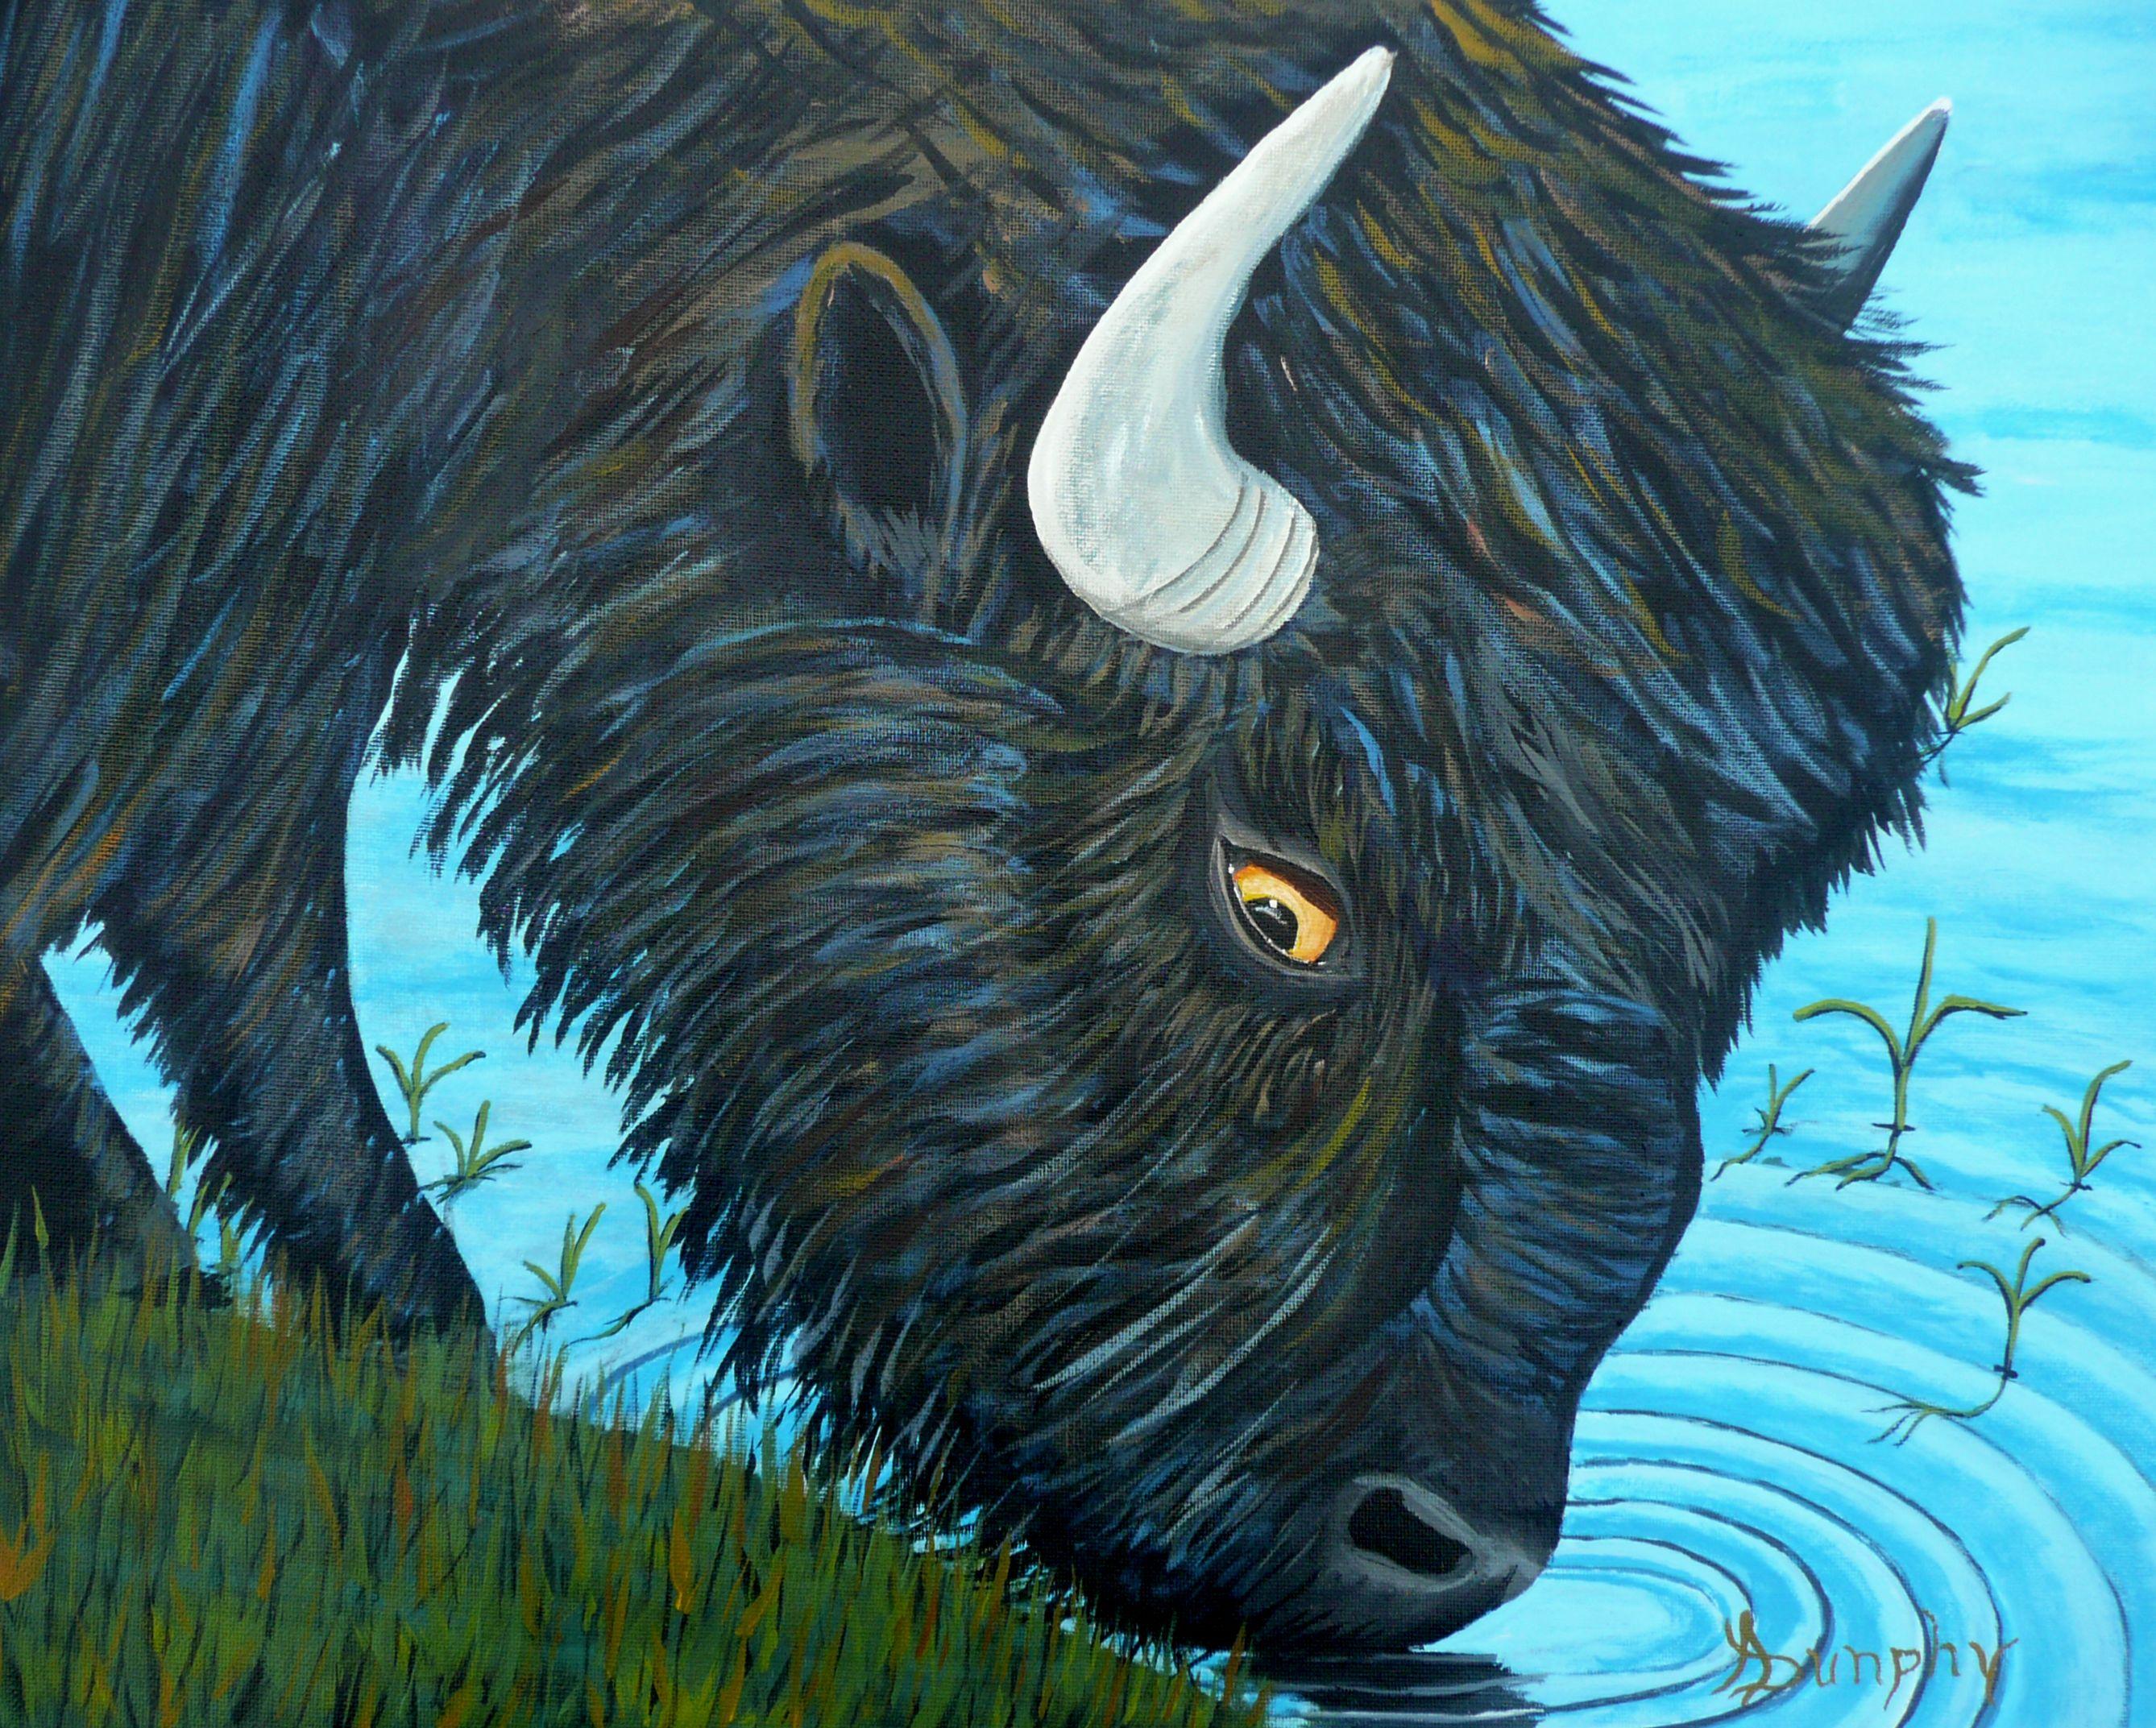 Anthony Dunphy Animal Painting - Shaggy Bison, Painting, Acrylic on Canvas